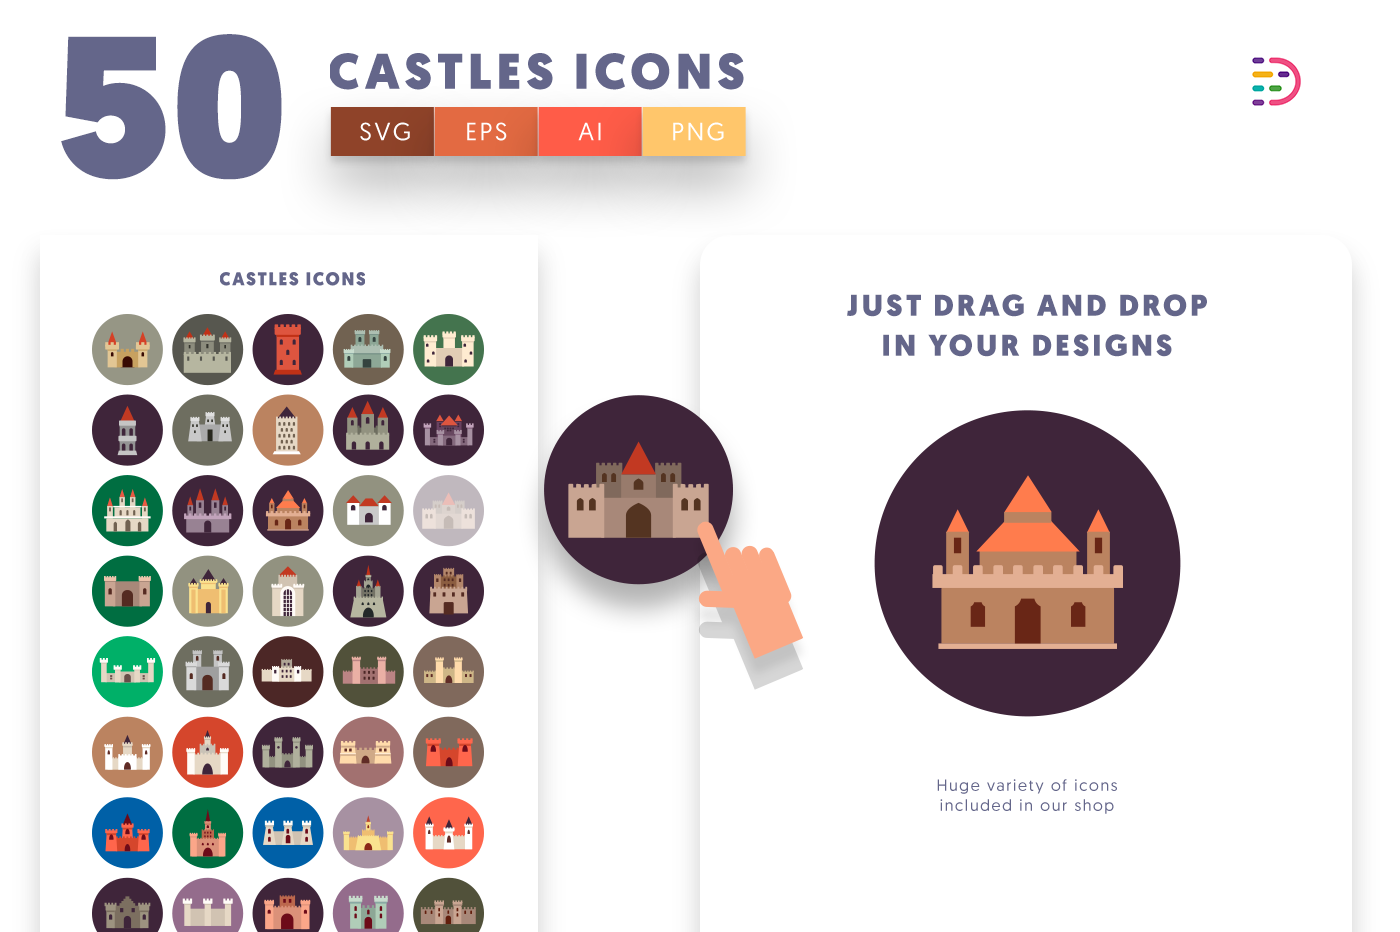 Drag and drop vector 50 Castle Icons